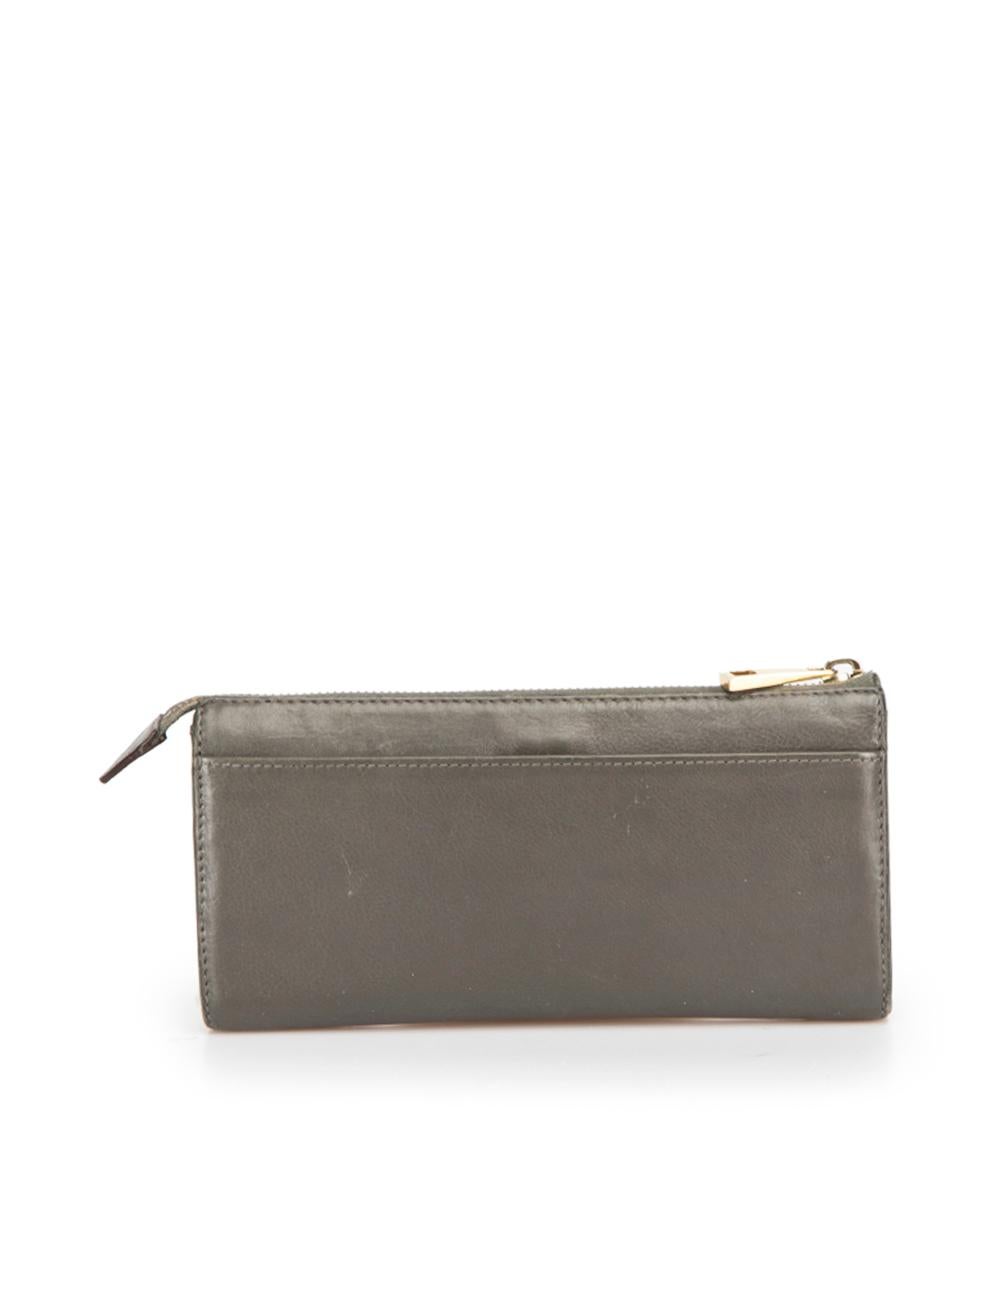 Marc Jacobs Women's Vintage Grey Leather Continental Wallet In Good Condition For Sale In London, GB